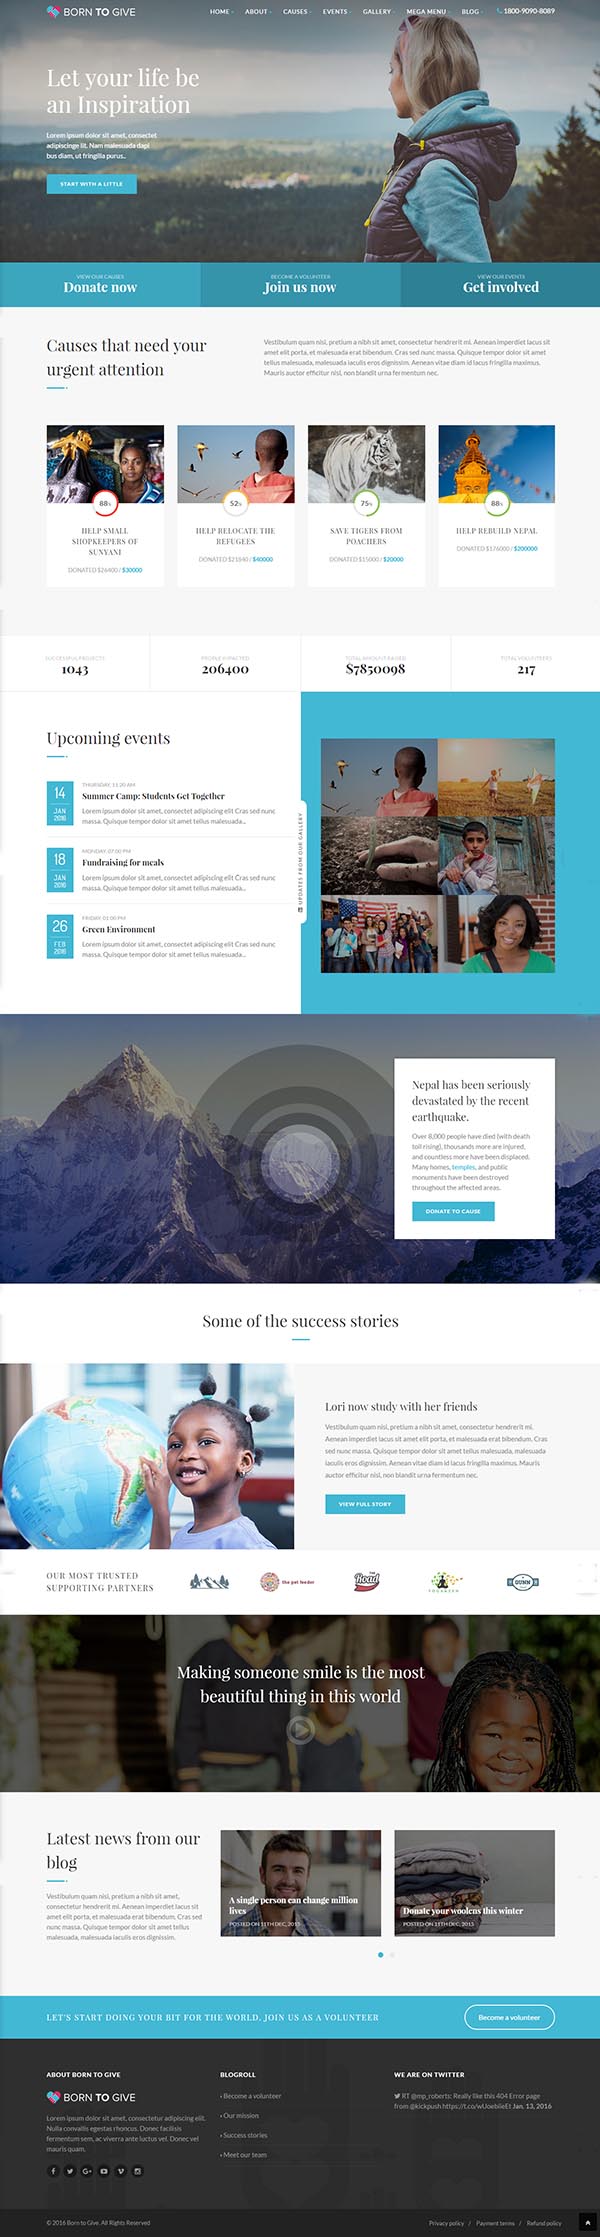 Born To Give - Charity Crowdfunding Responsive HTML5 Template